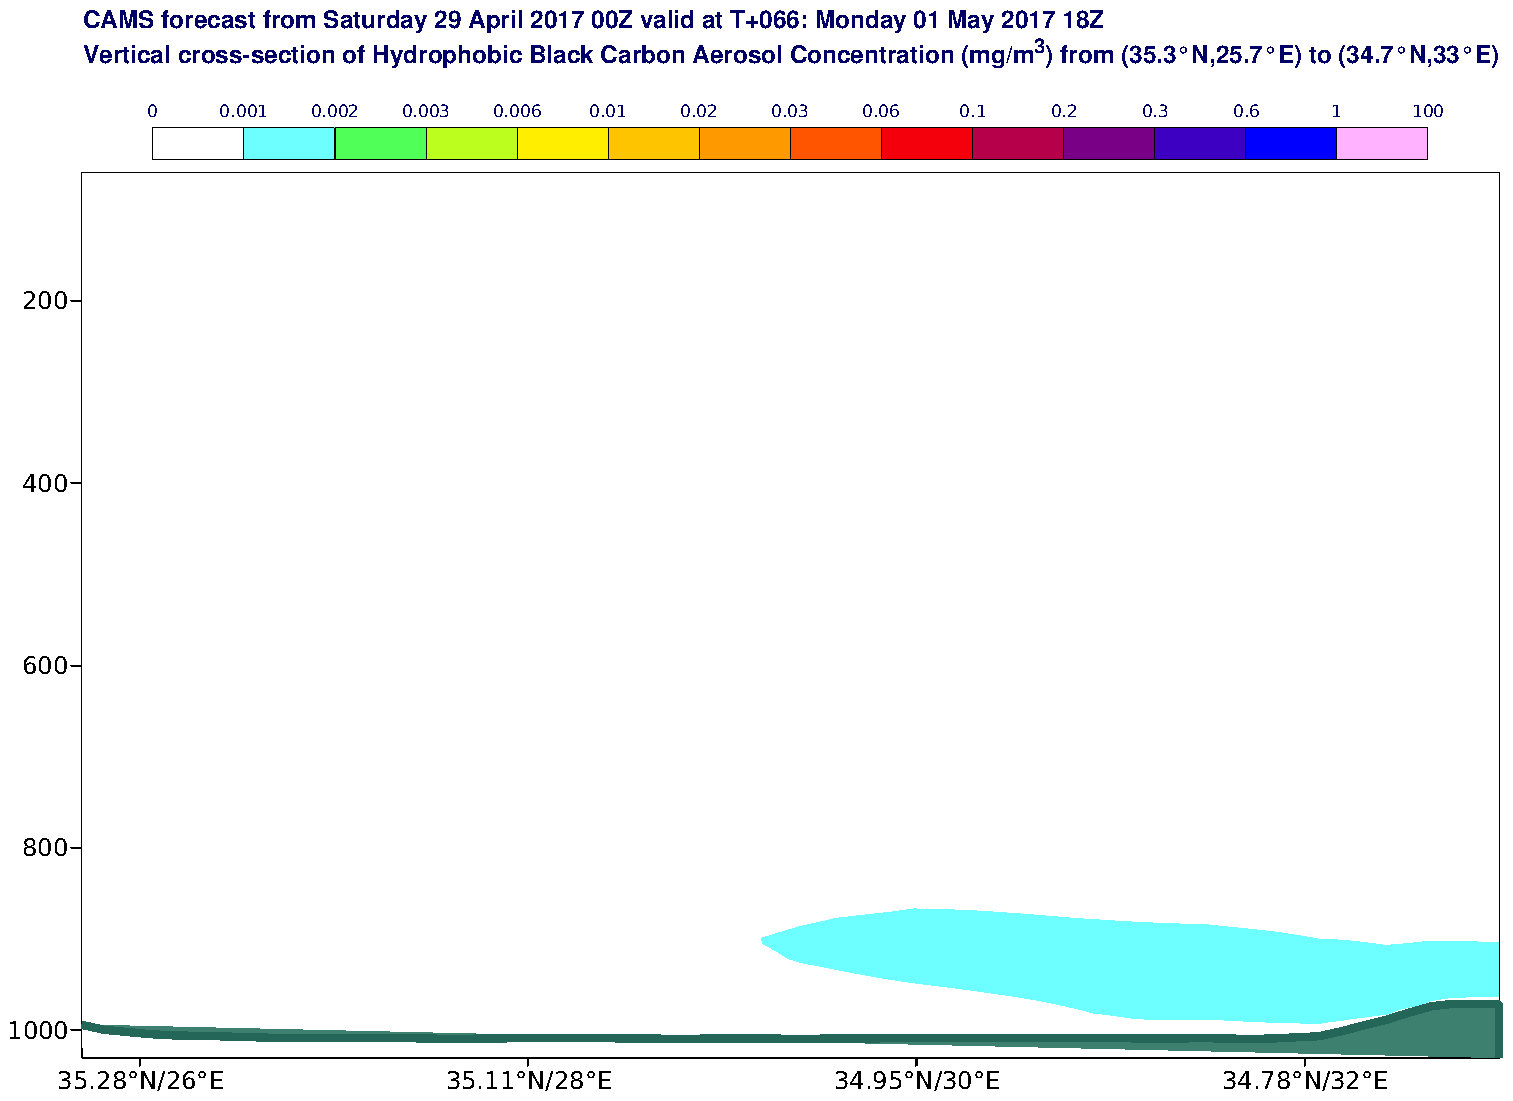 Vertical cross-section of Hydrophobic Black Carbon Aerosol Concentration (mg/m3) valid at T66 - 2017-05-01 18:00